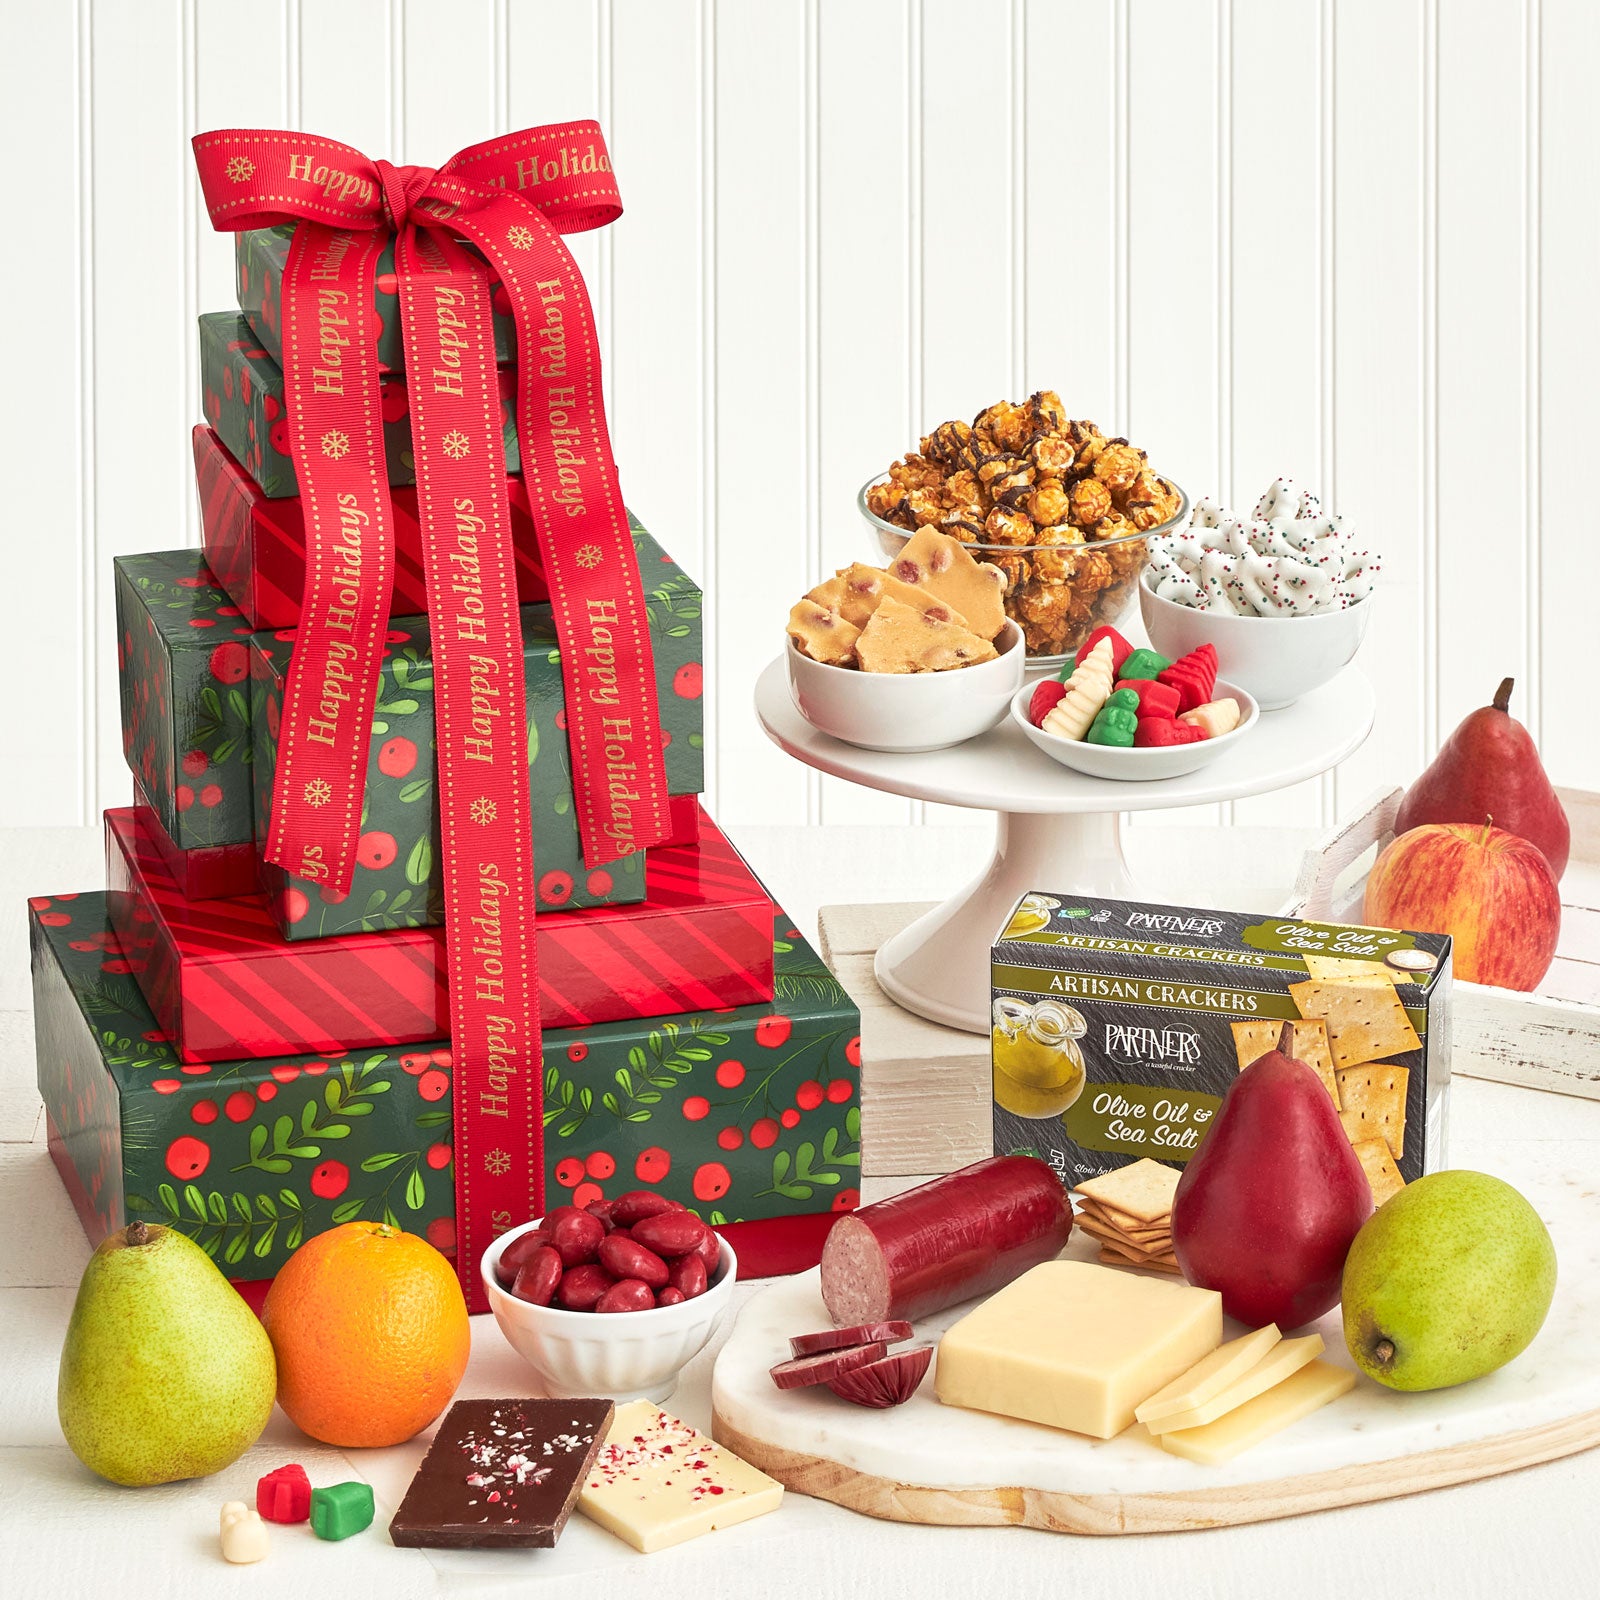 A multiple-tiered gift tower surrounded by an assortment of fruit, popcorn, frosted pretzels, peanut brittle, candy, crackers, cheese, sausage, and peppermint bark.